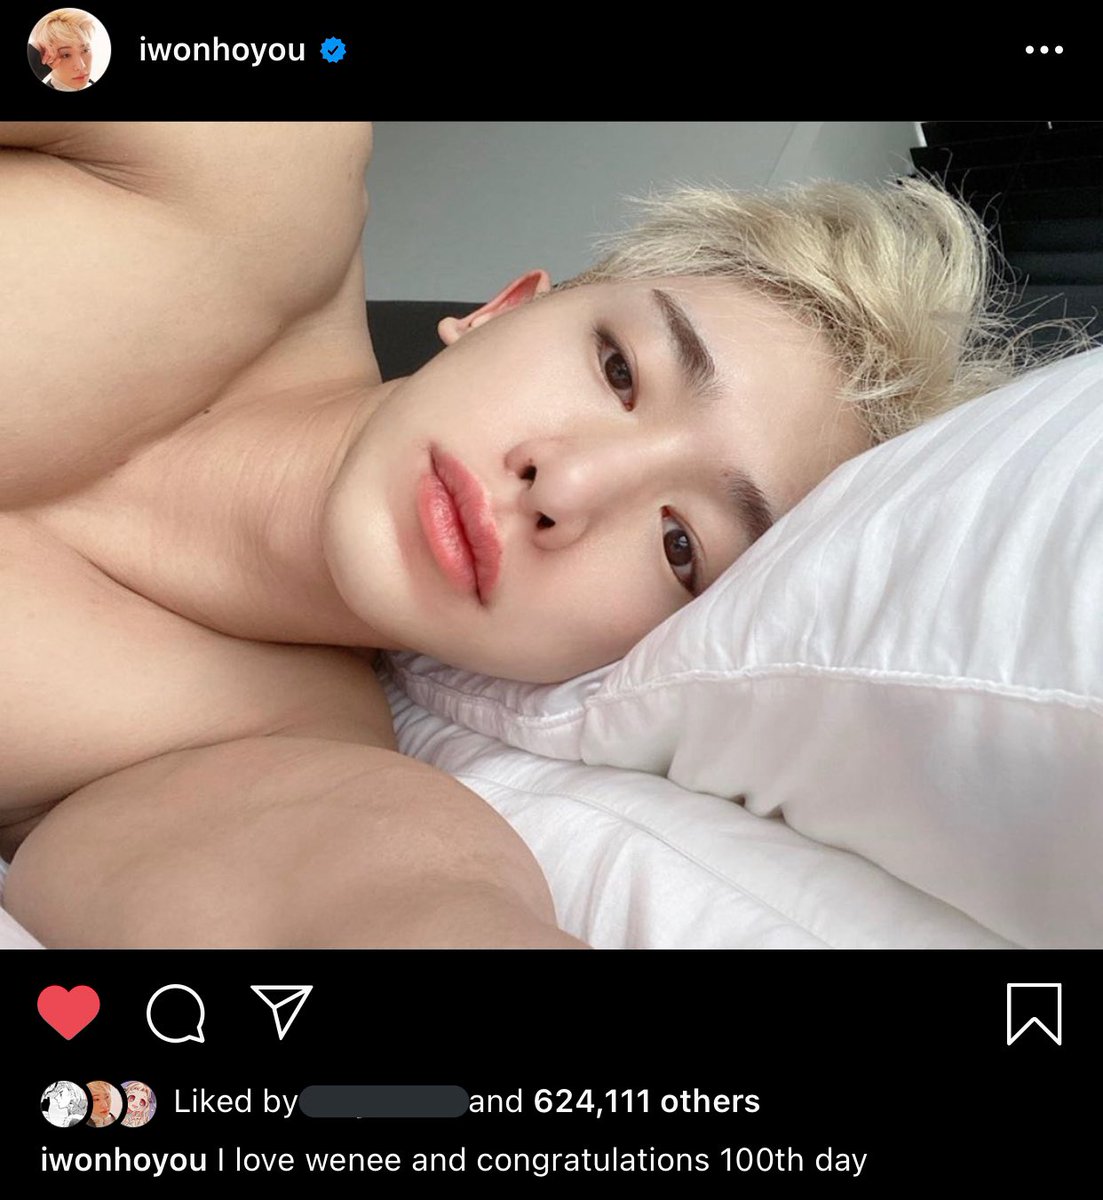 him posting a thirst trap as gift instead of a big ass sappy paragraph telling us how much he loves us